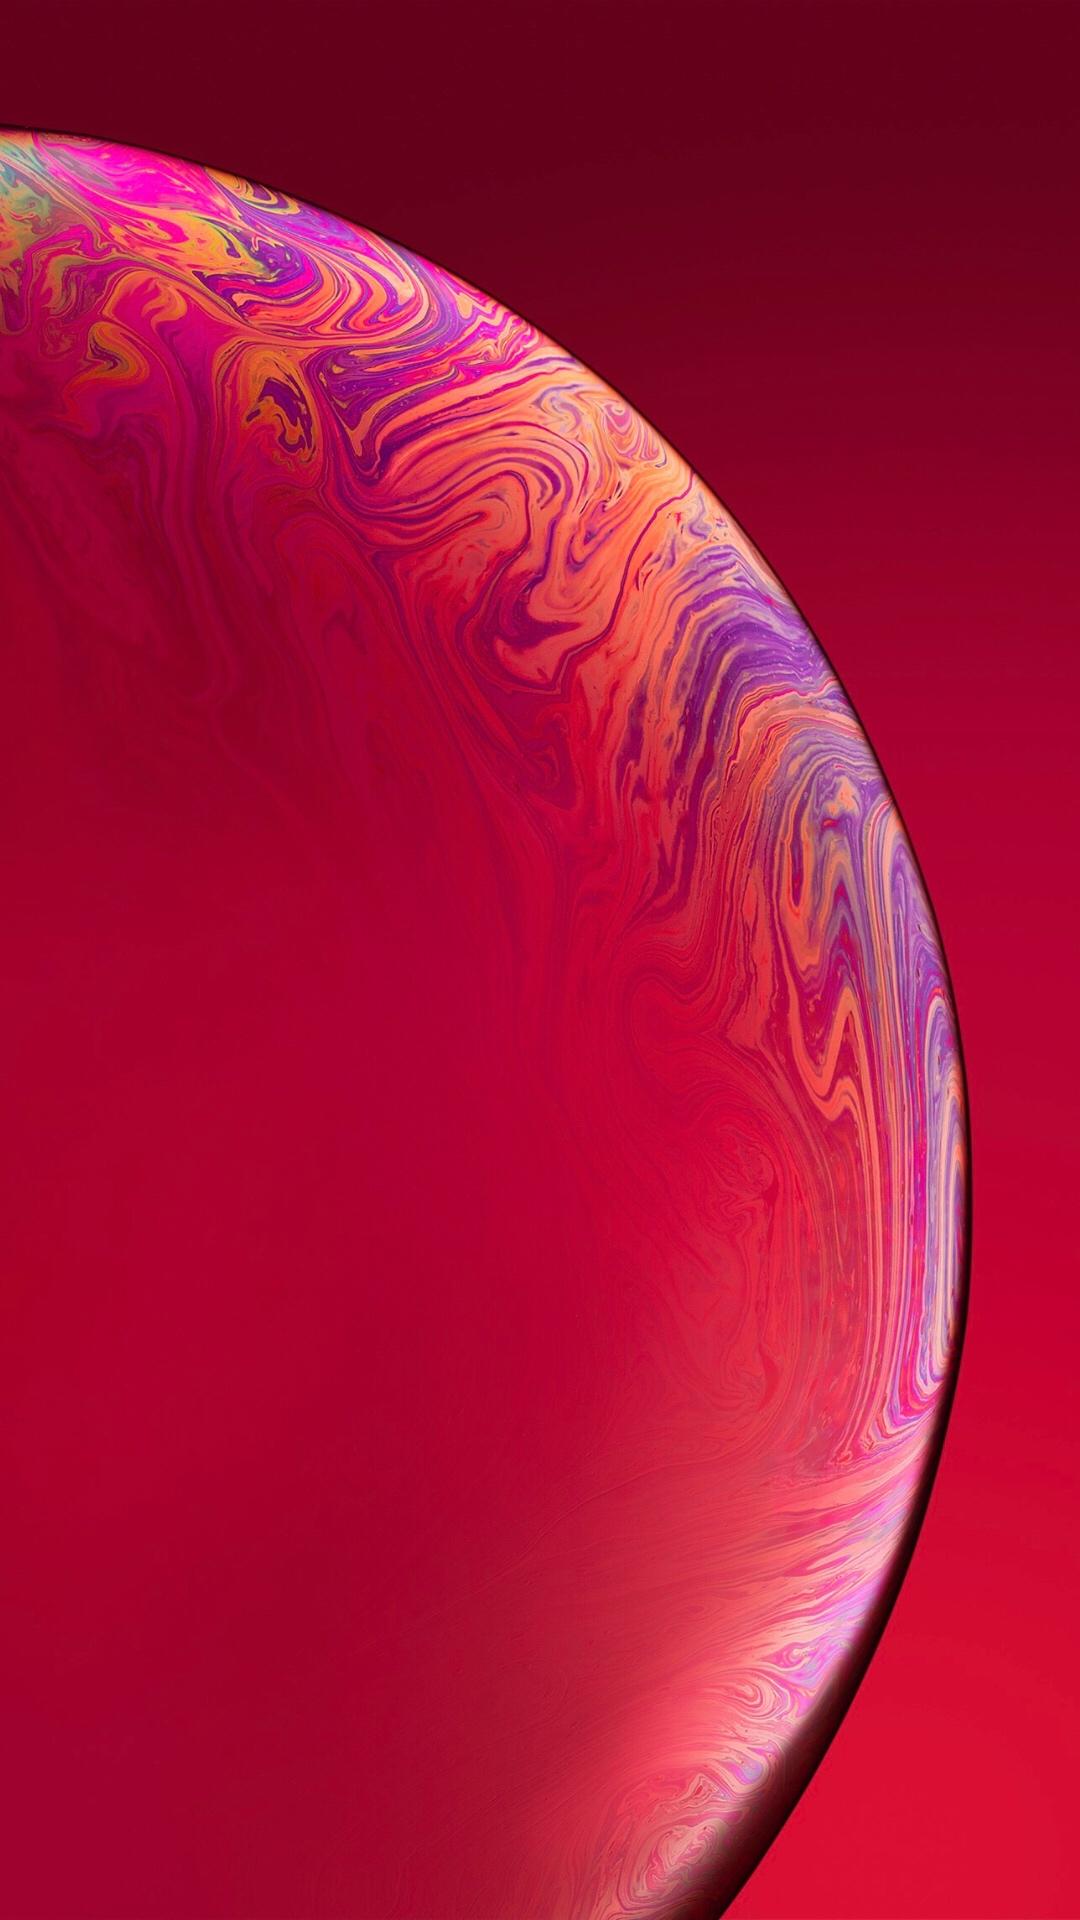 1080 x 1920 · jpeg - Wallpapers: iPhone Xs, iPhone Xs Max, and iPhone Xr